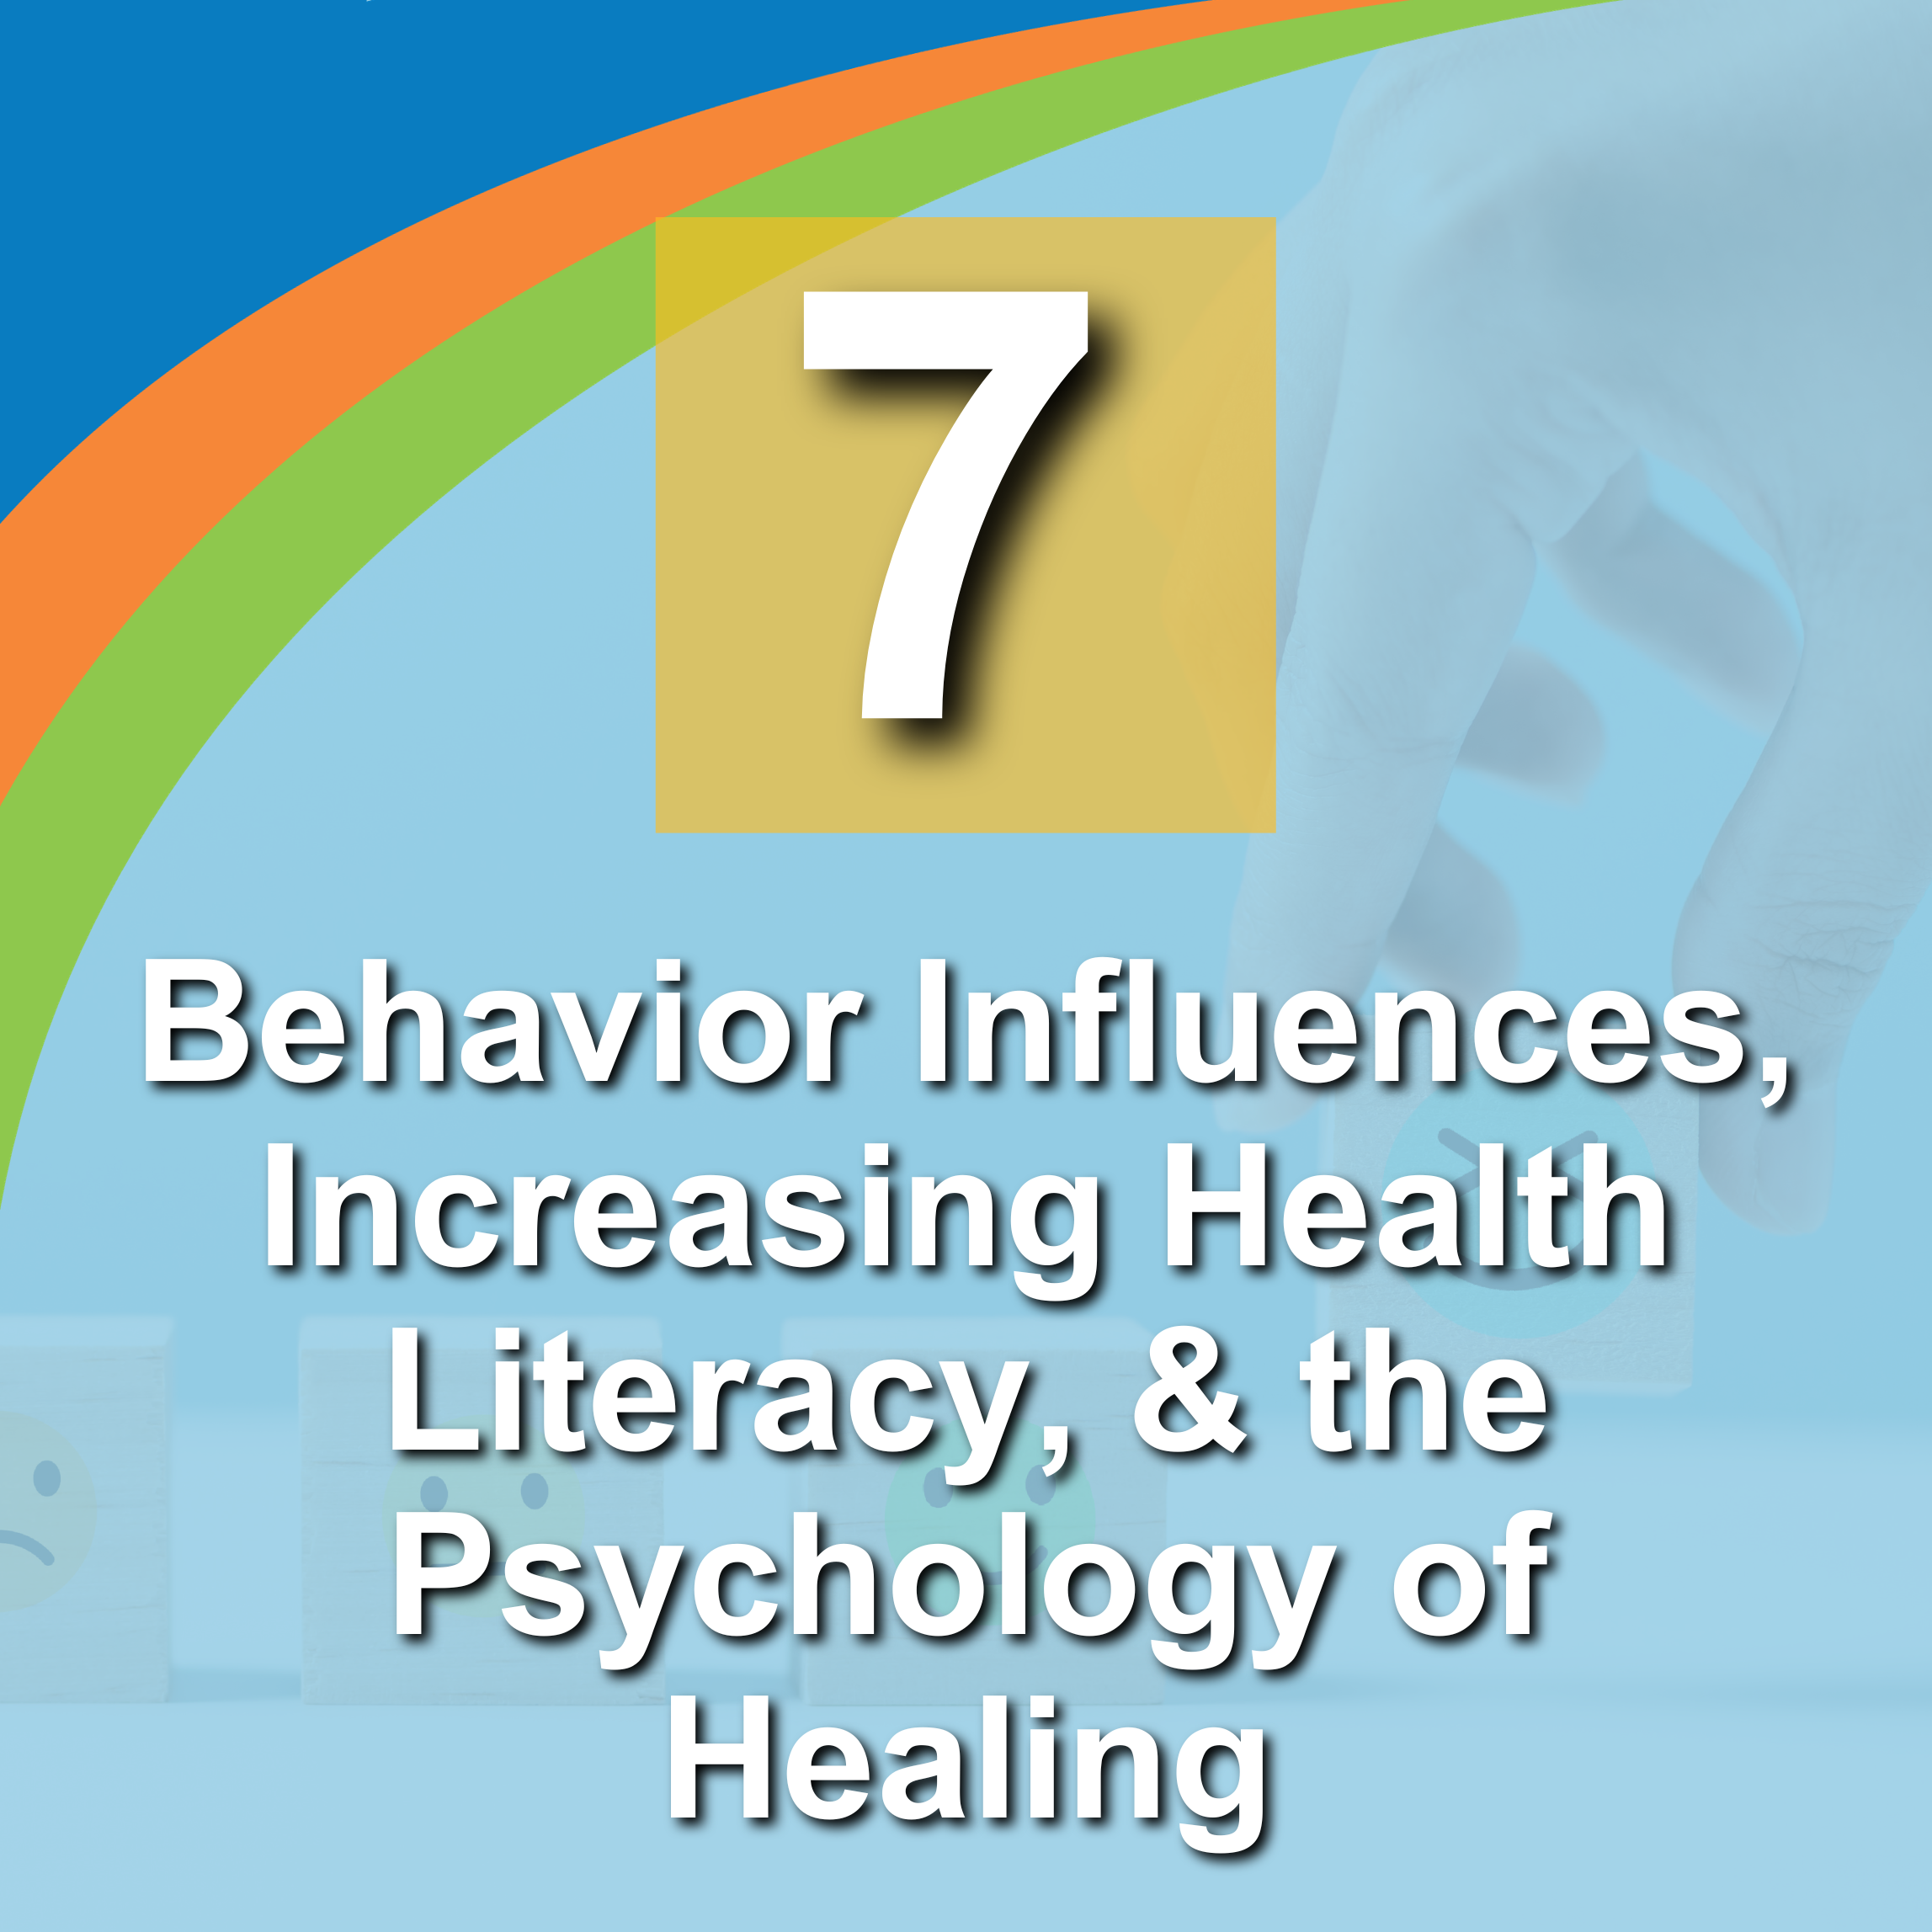 7. Behavior Influences, Increasing Health Literacy, and the Psychology of Healing